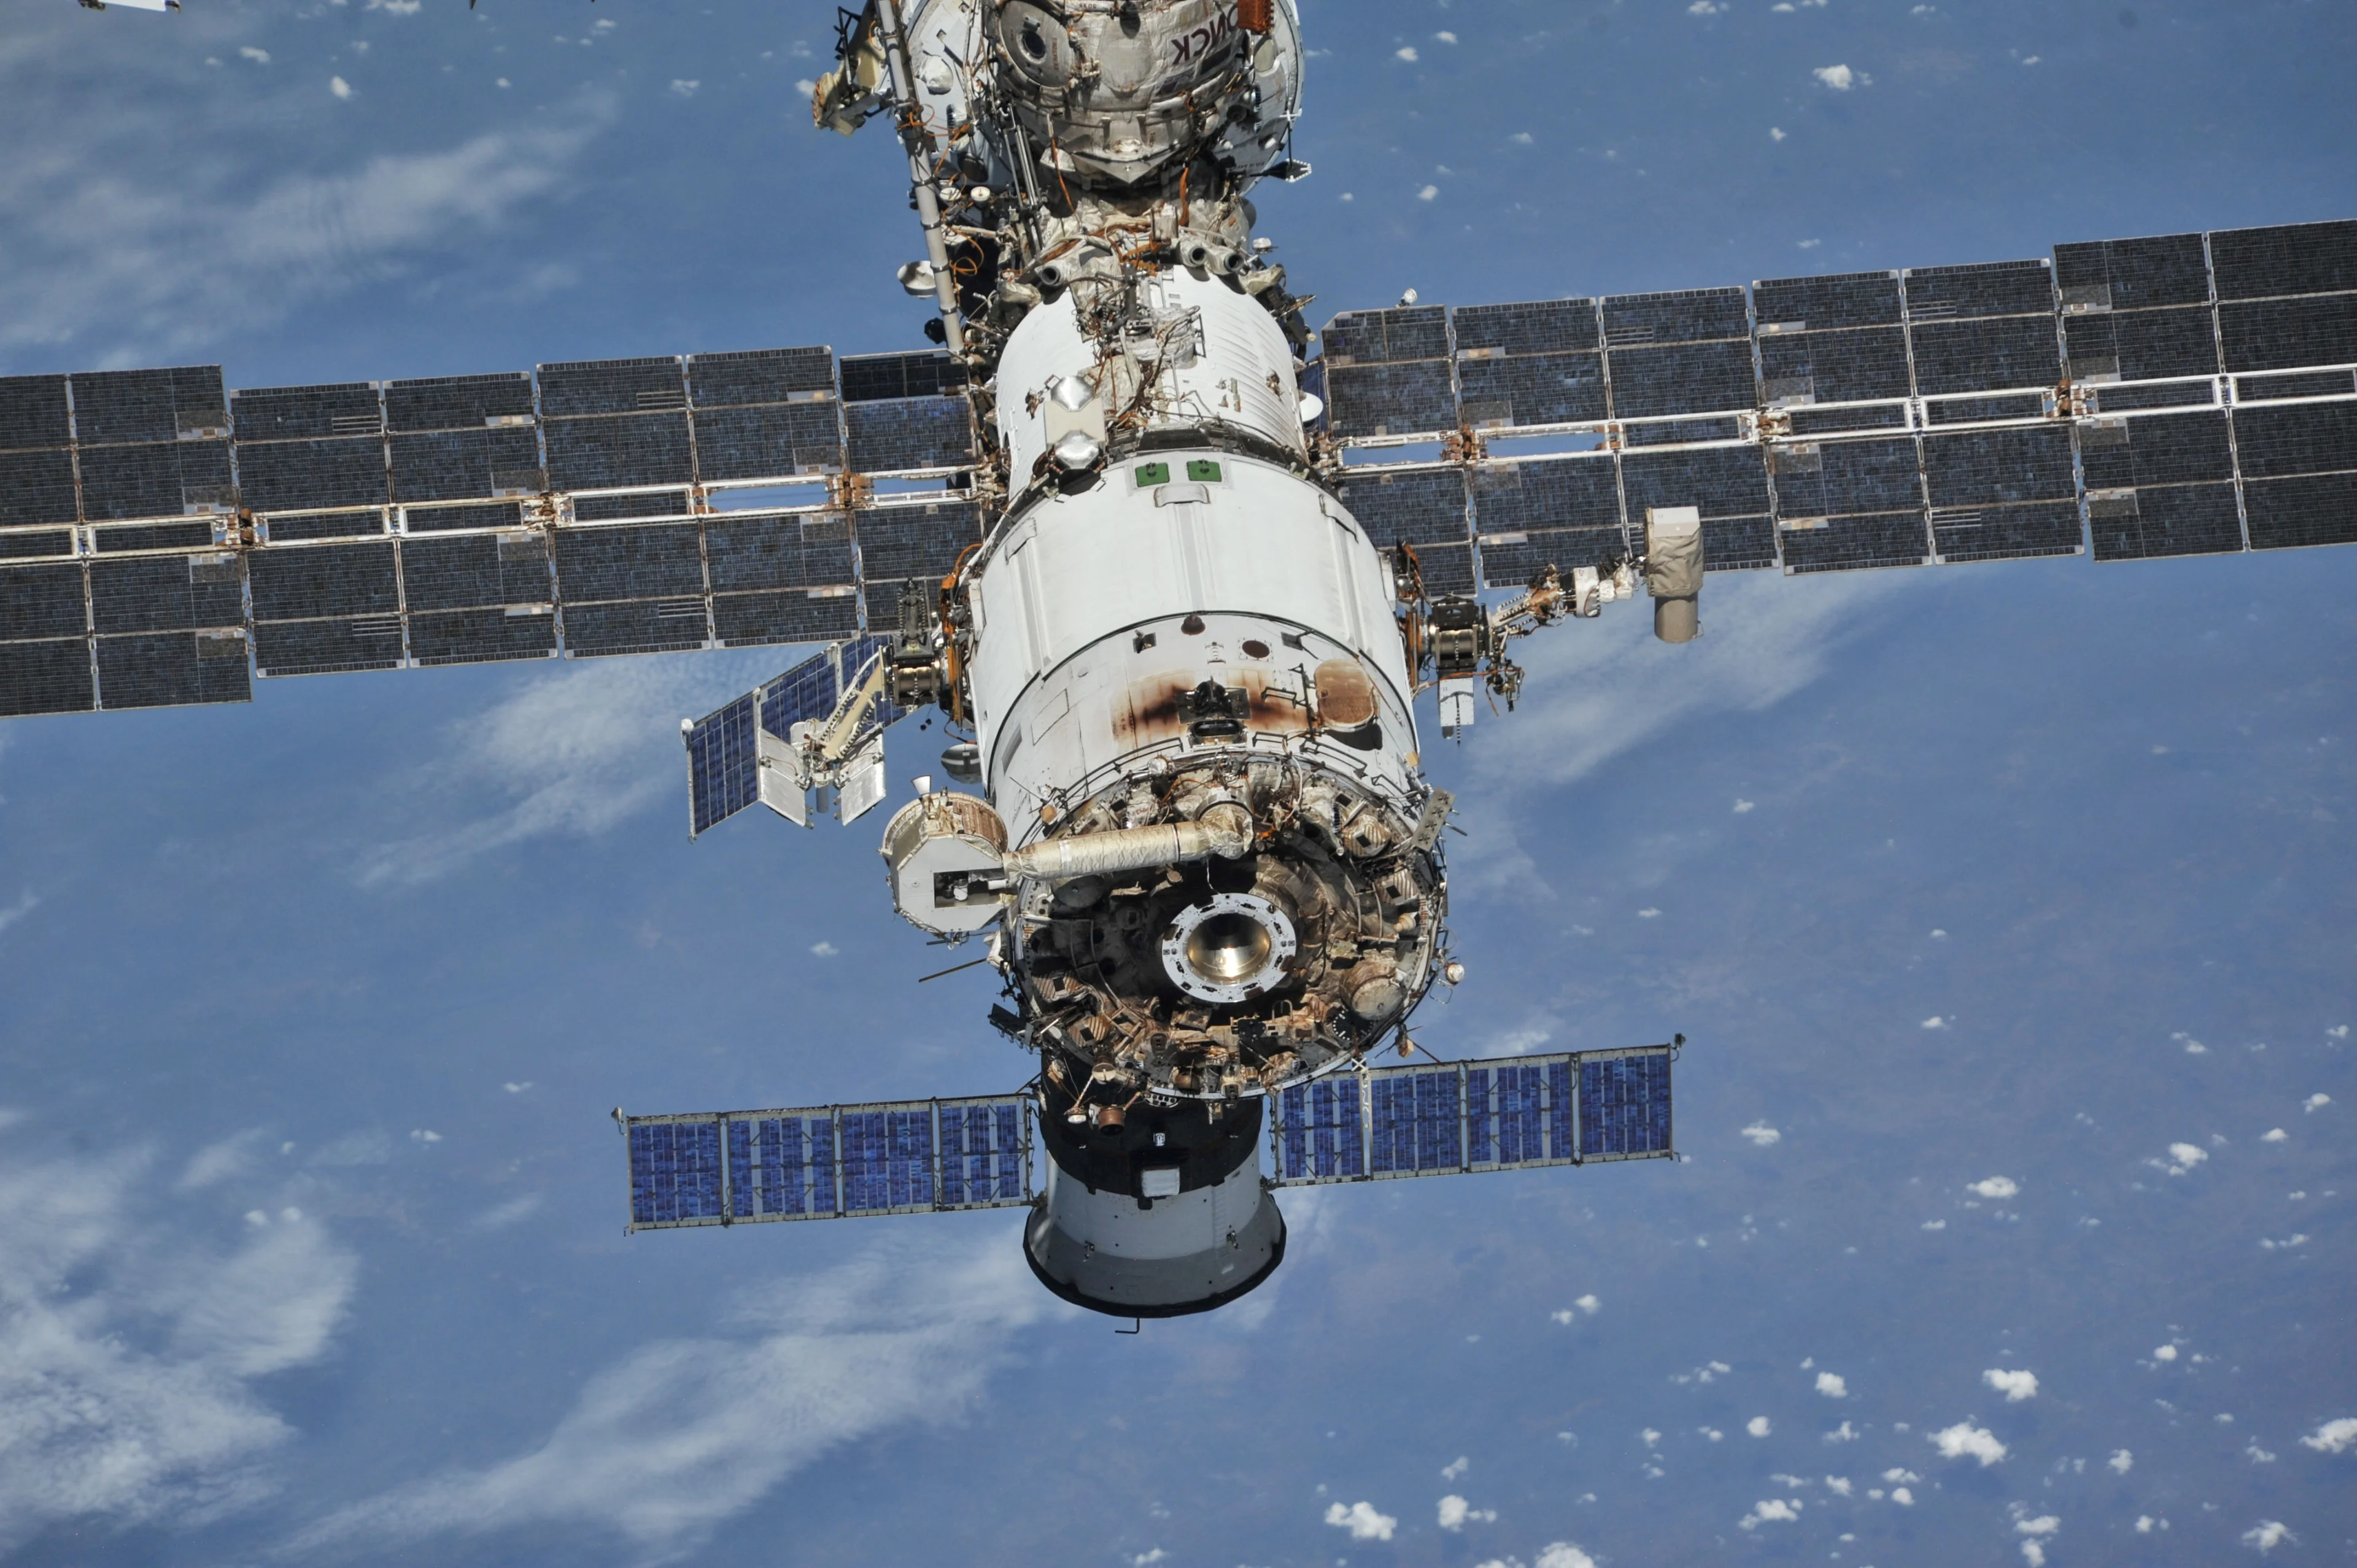 2021-08-30T125543Z 1 LYNXMPEH7T0H3 RTROPTP 4 SPACE-EXPLORATION-ISS-RUSSIA